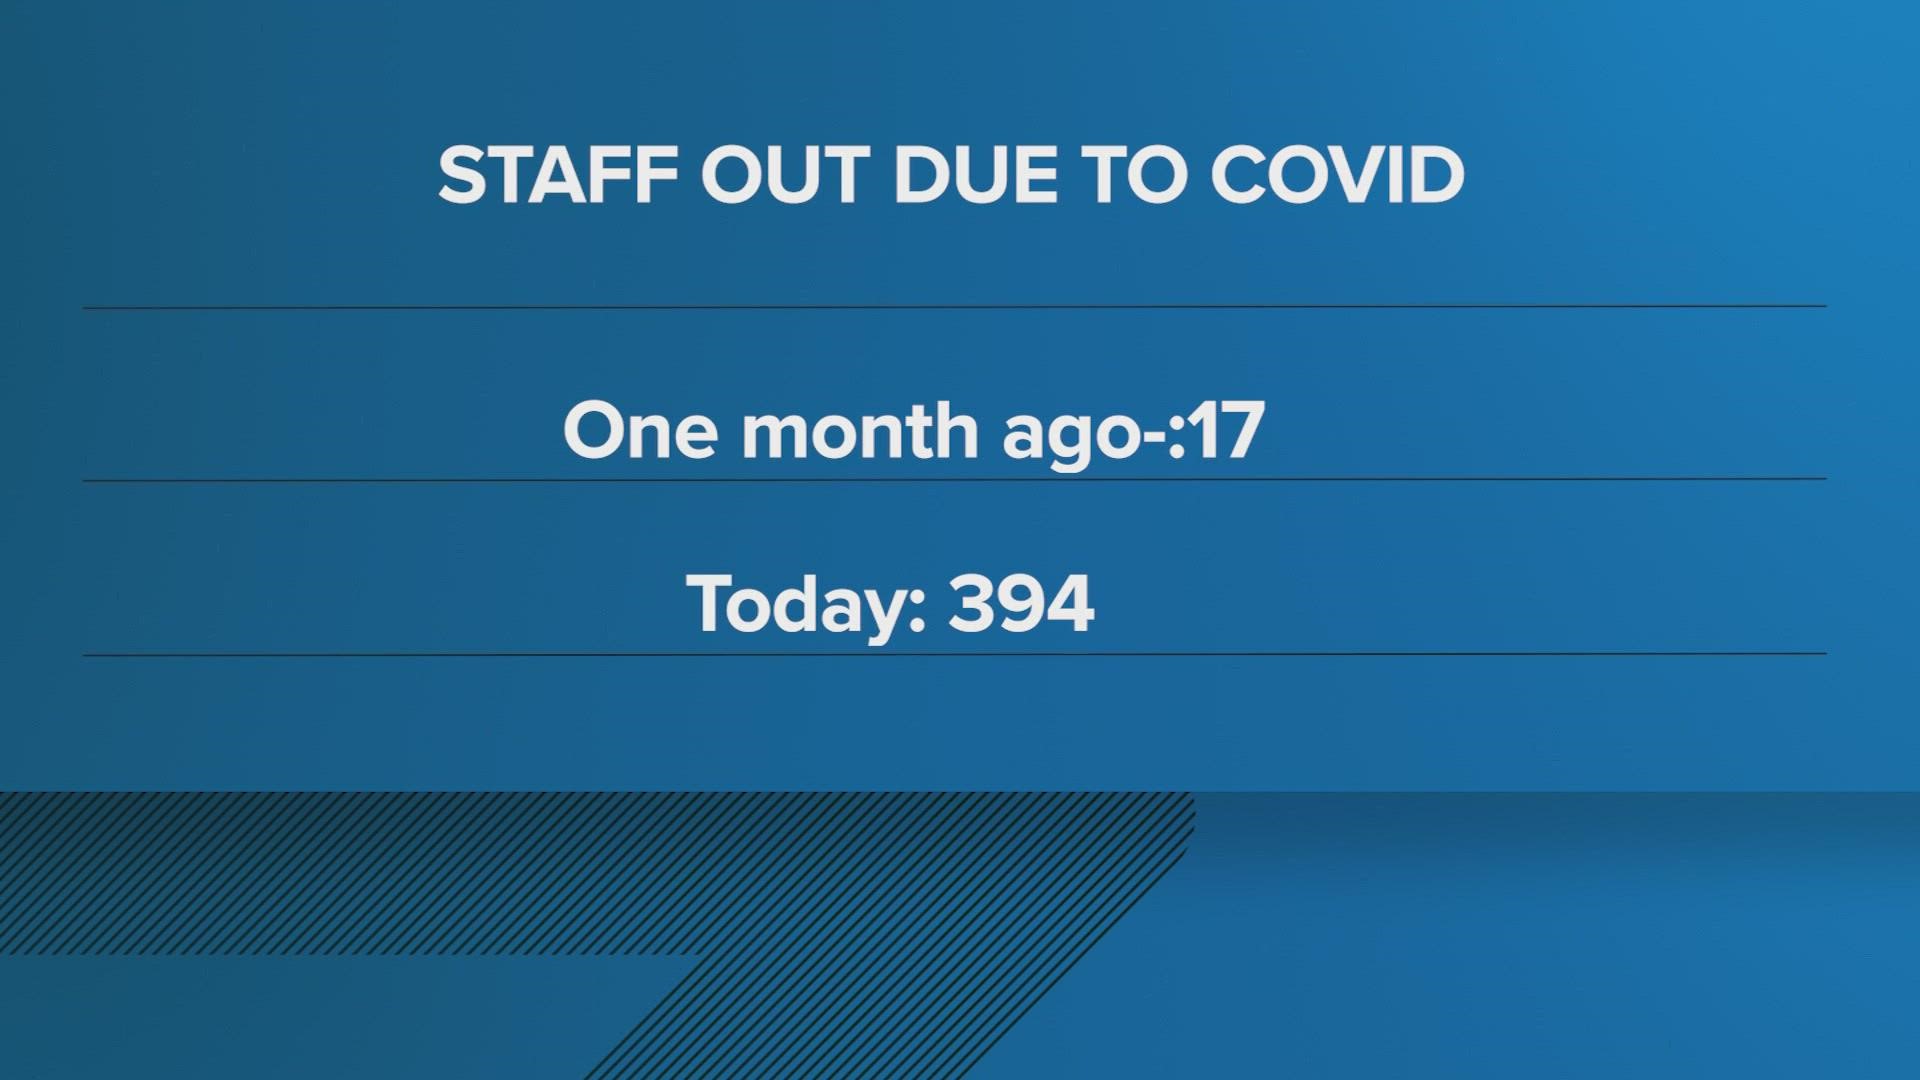 Weeks before the next expected COVID peak, the Harris Health System CEO reports almost 400 staff from different hospitals out sick with the virus.